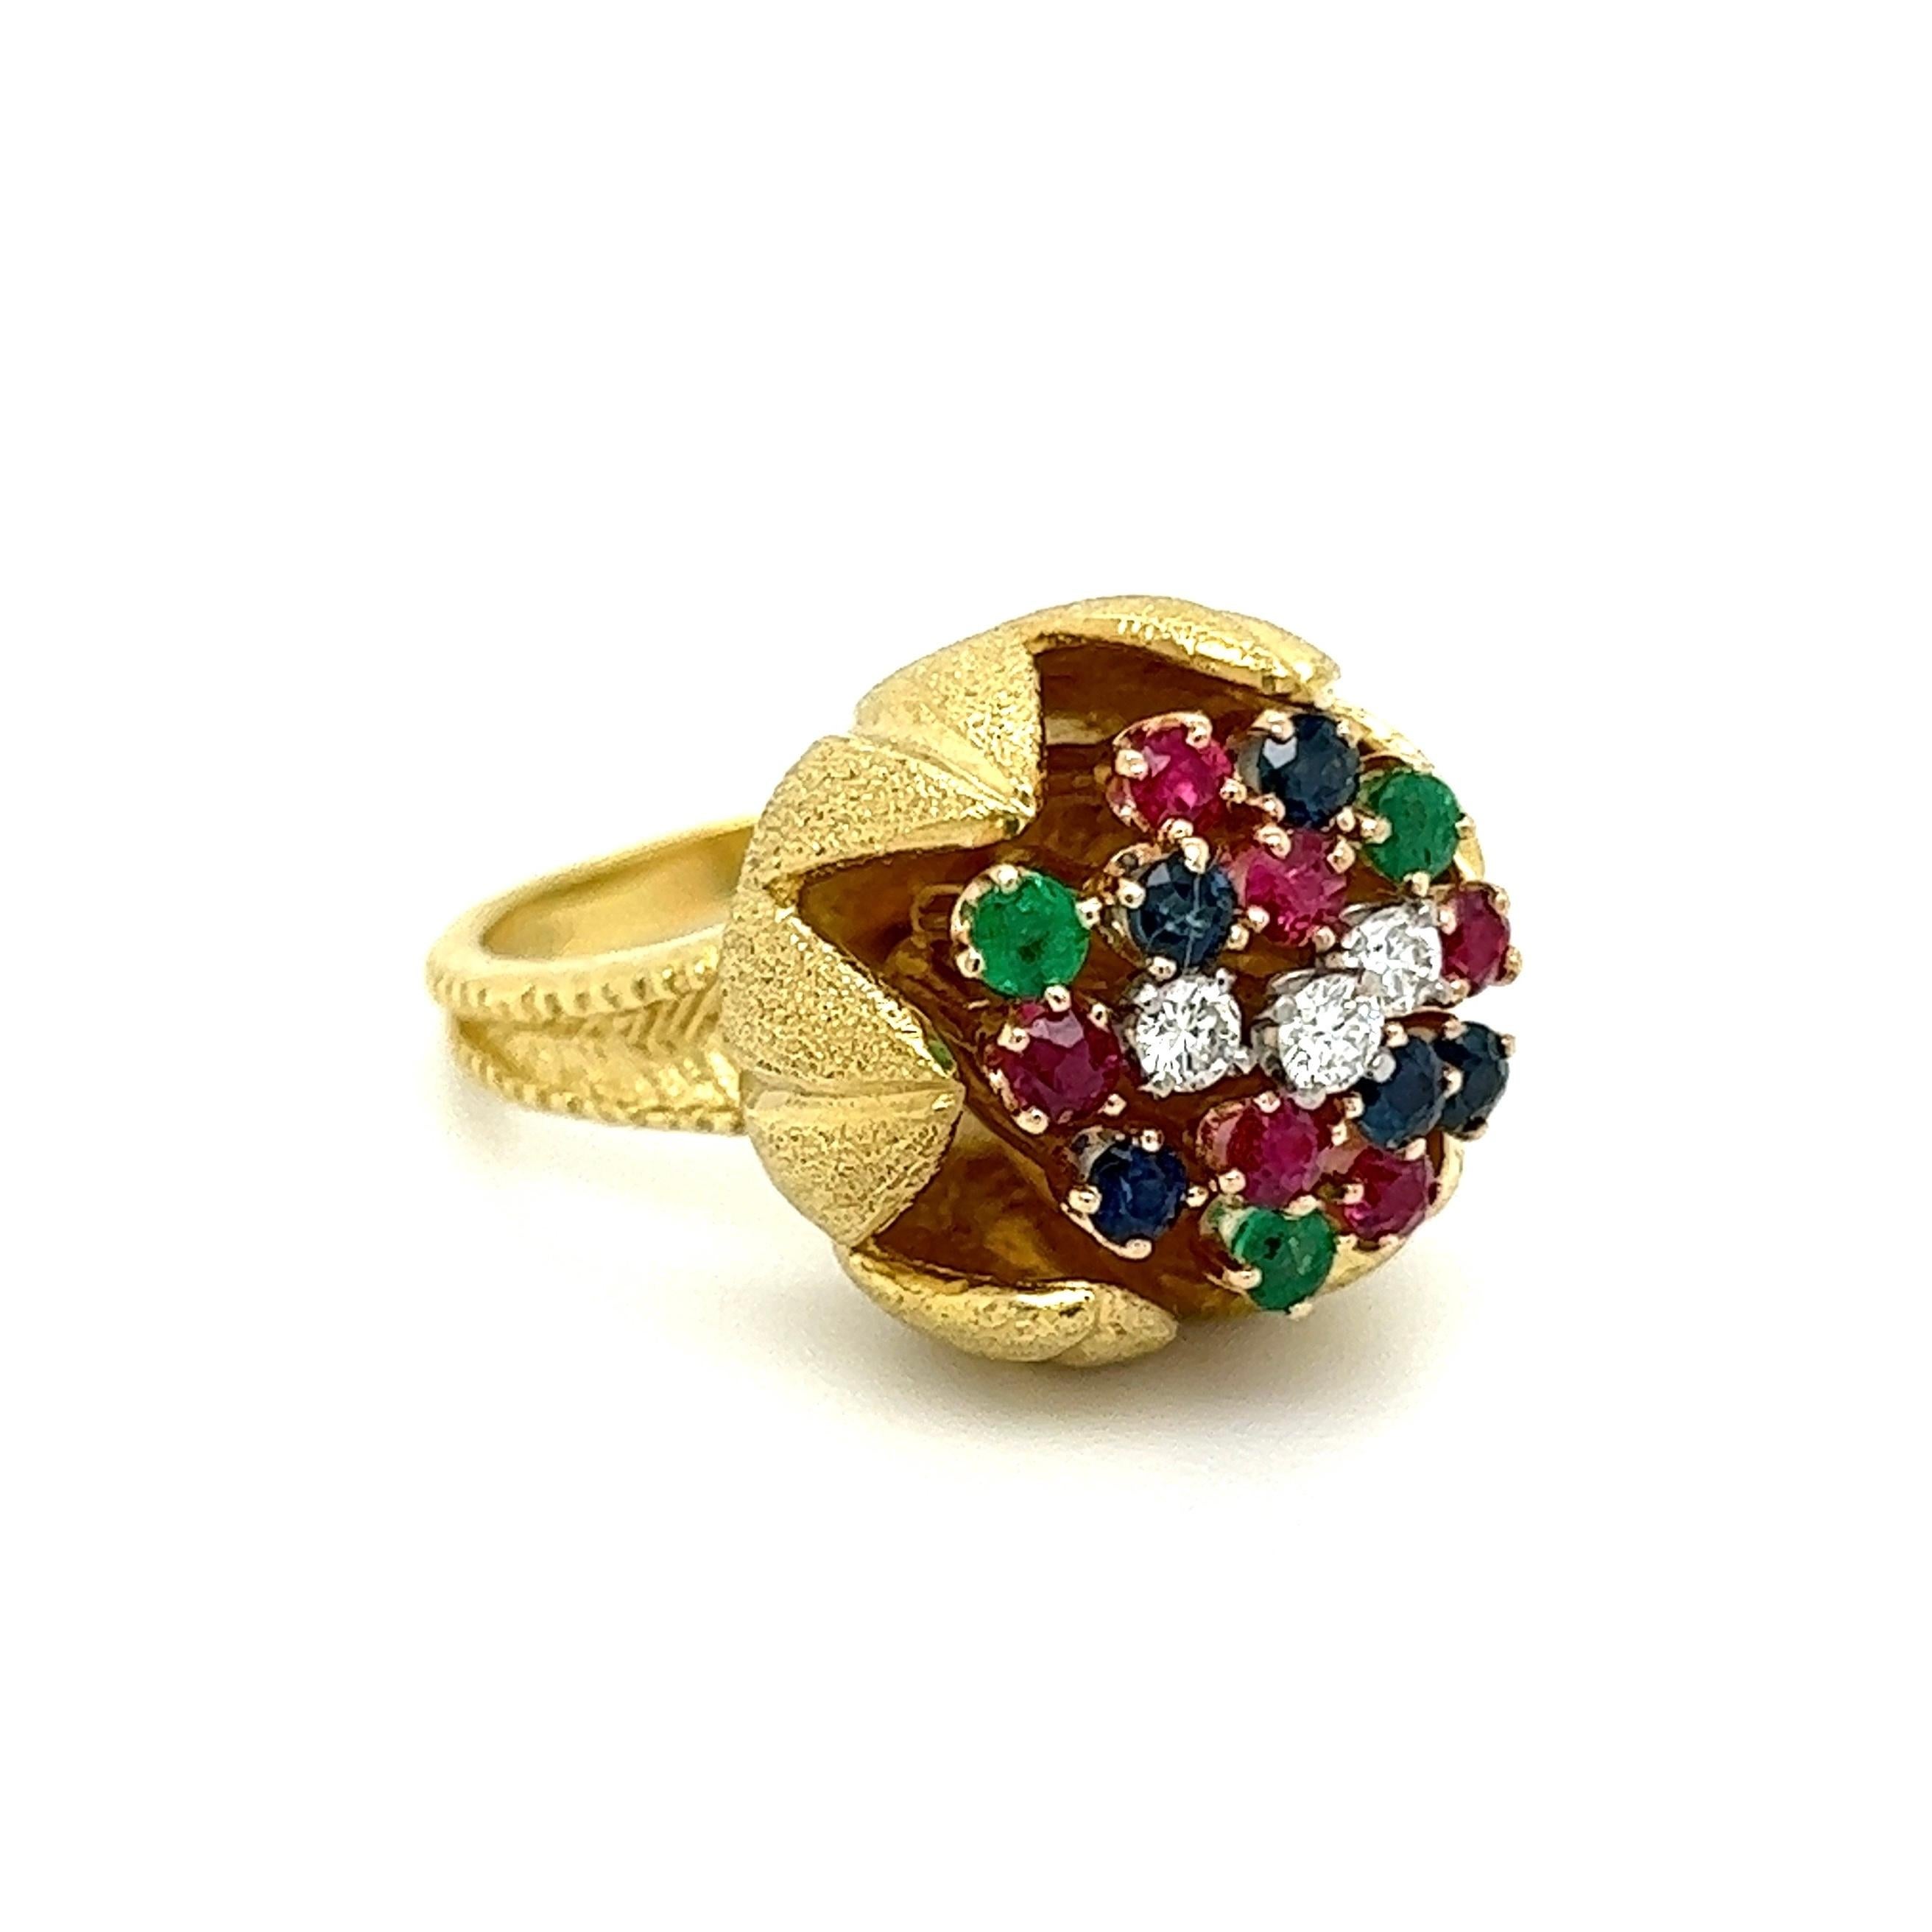 Simply Beautiful! Multi Gem and Diamond Gold Cocktail Ring. Centering a Hand set securely nestled Cluster of Rubies, Emeralds, Sapphires and Diamonds. Beautifully Hand crafted 18K Yellow Gold mounting. Approx. Dimensions of the ring: 1.26